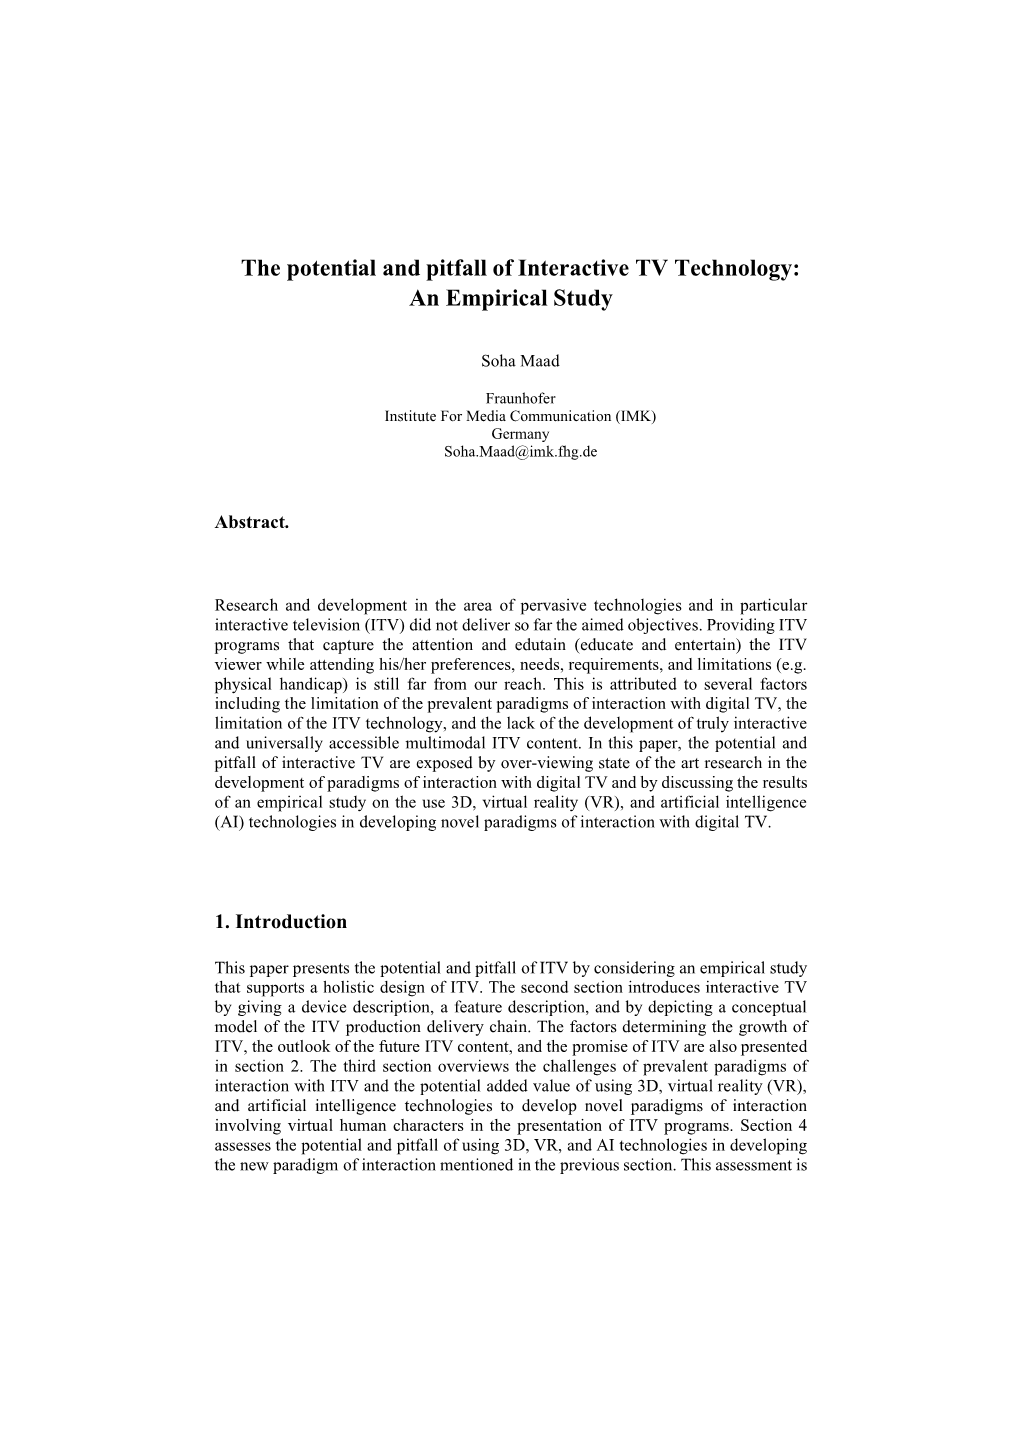 The Potential and Pitfall of Interactive TV Technology: an Empirical Study